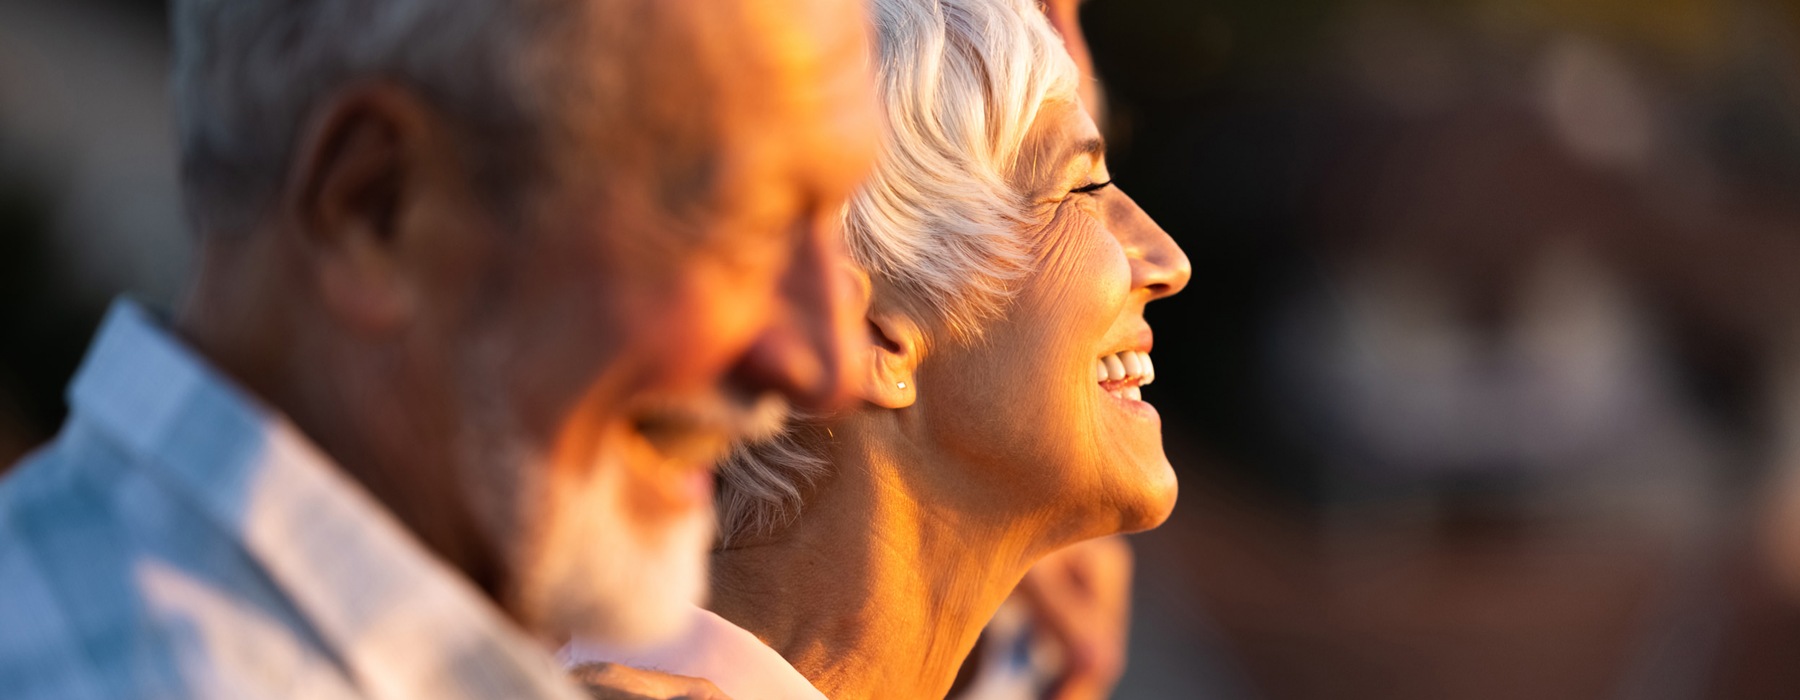 a man and woman smiling watching a sunset